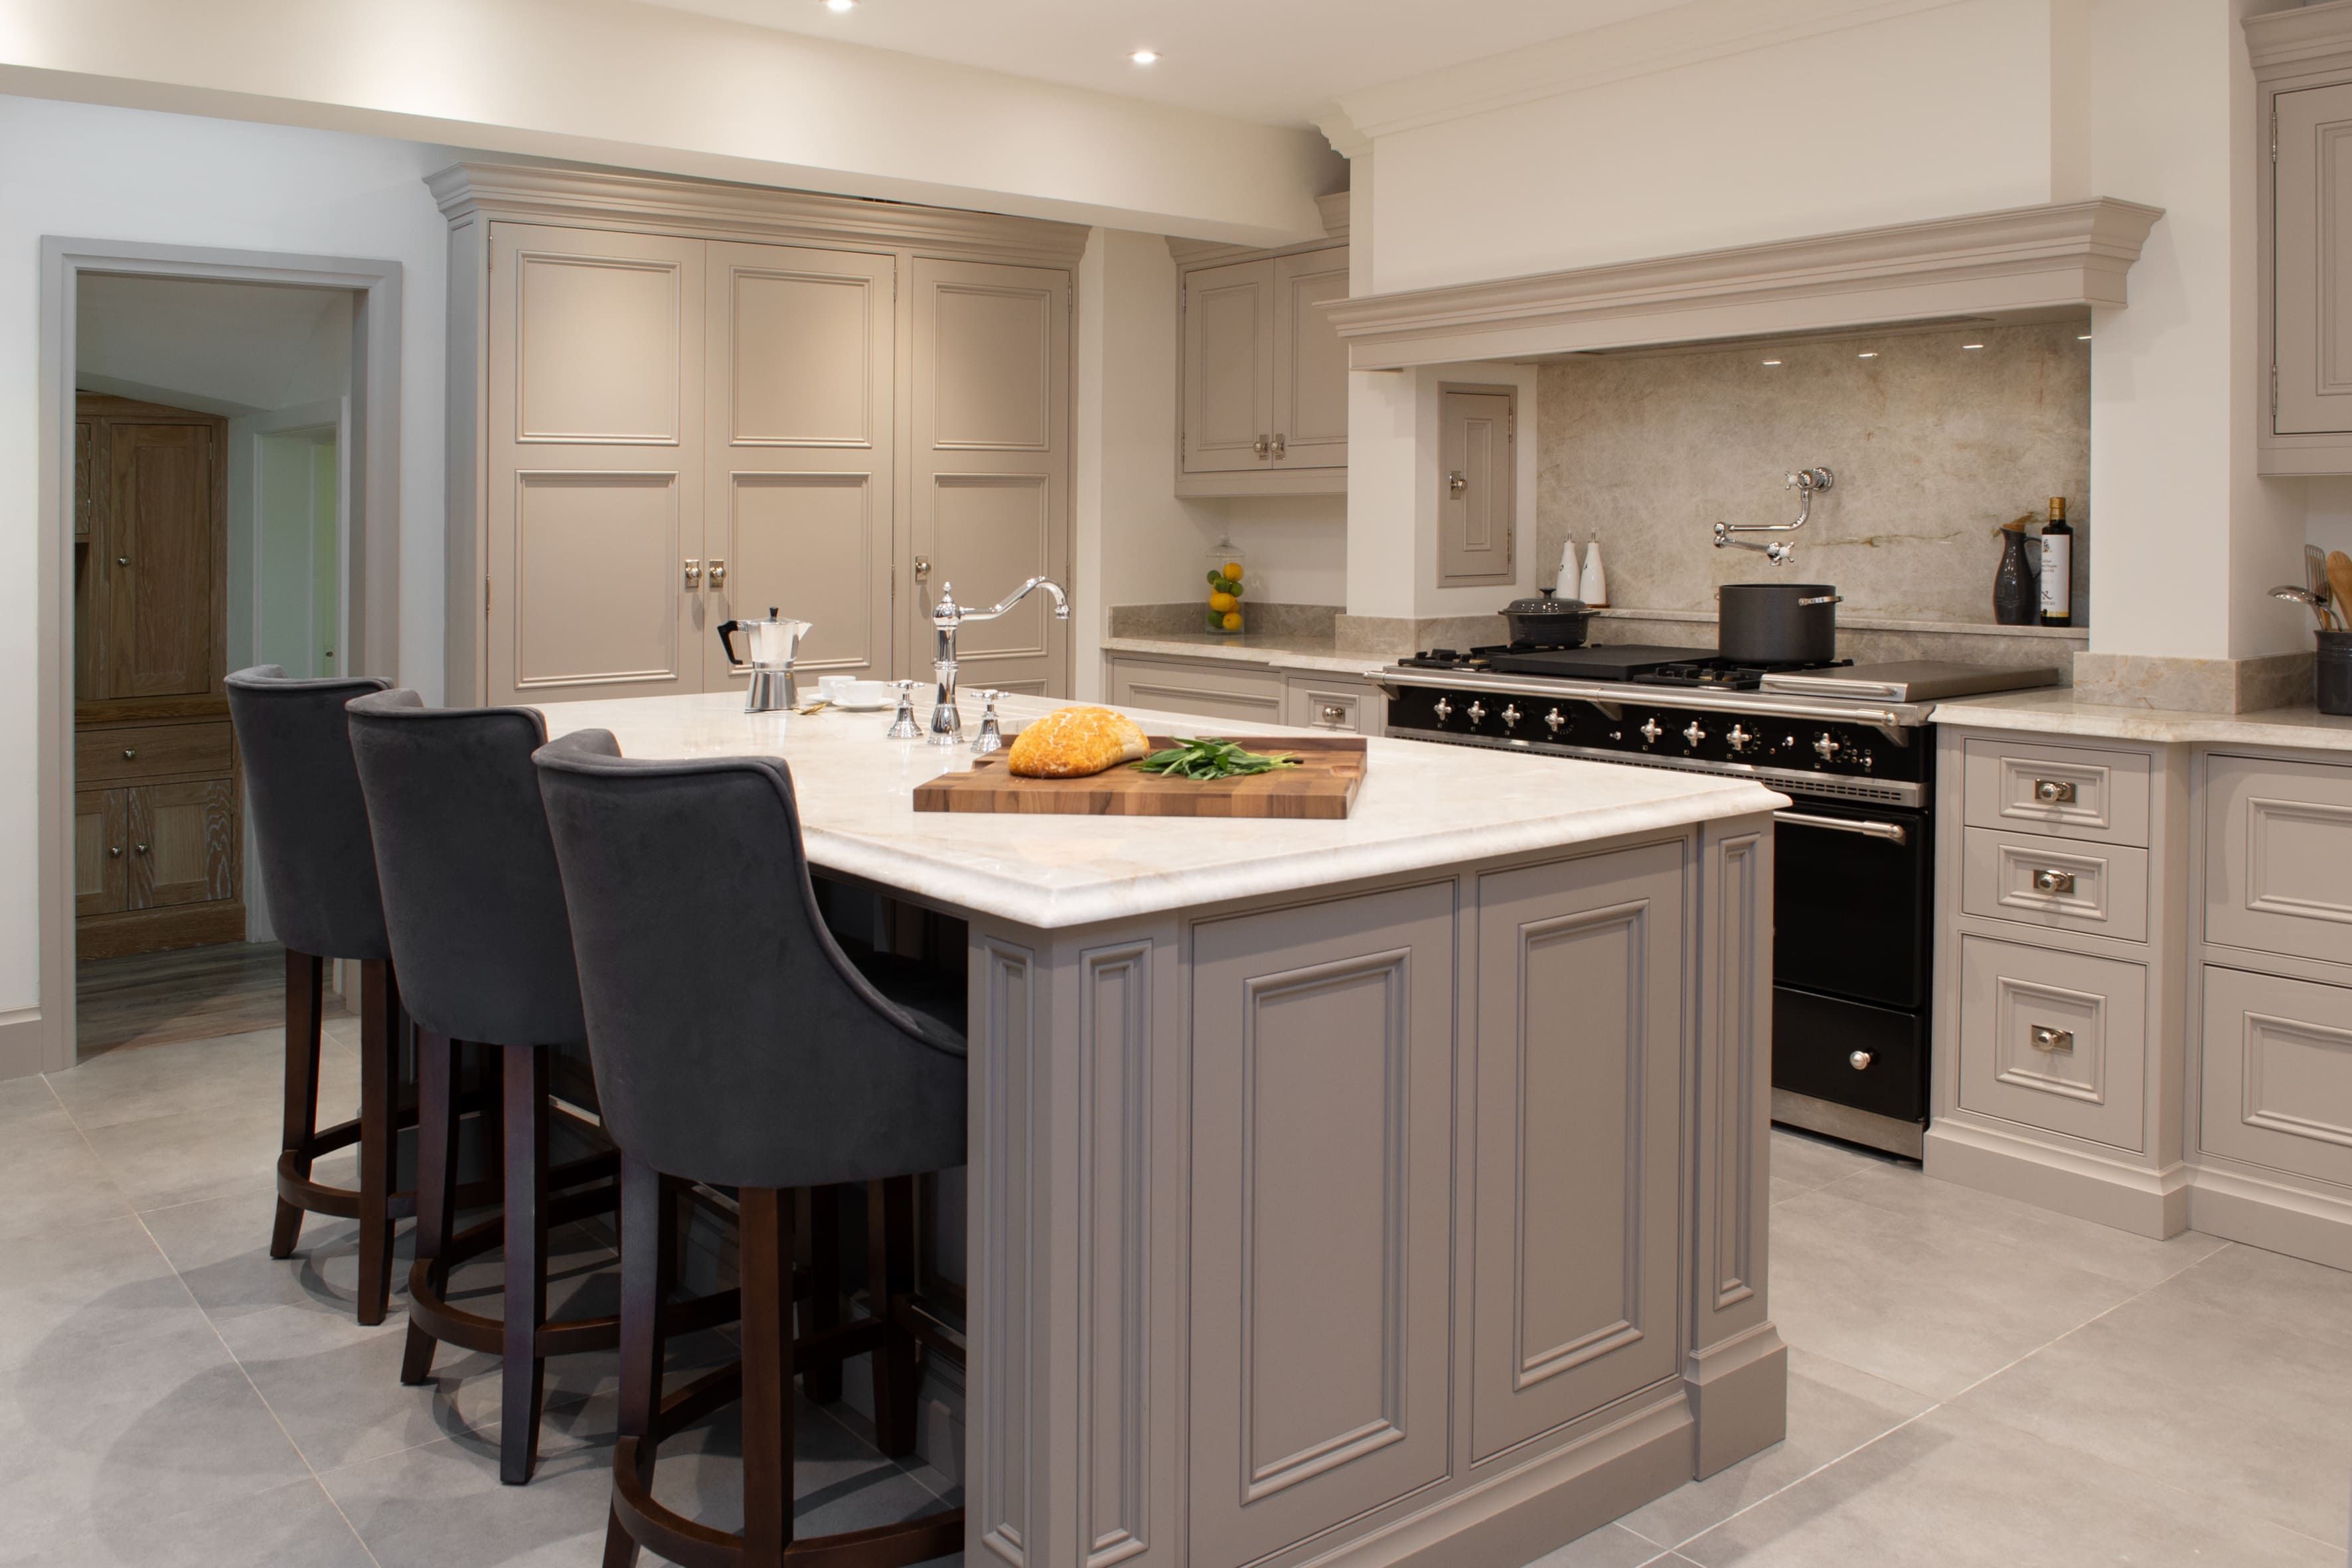 A grey-based, bespoke kitchen island. A large gas-top stove can be seen on the back wall, surrounded by shaker-style cabinets.